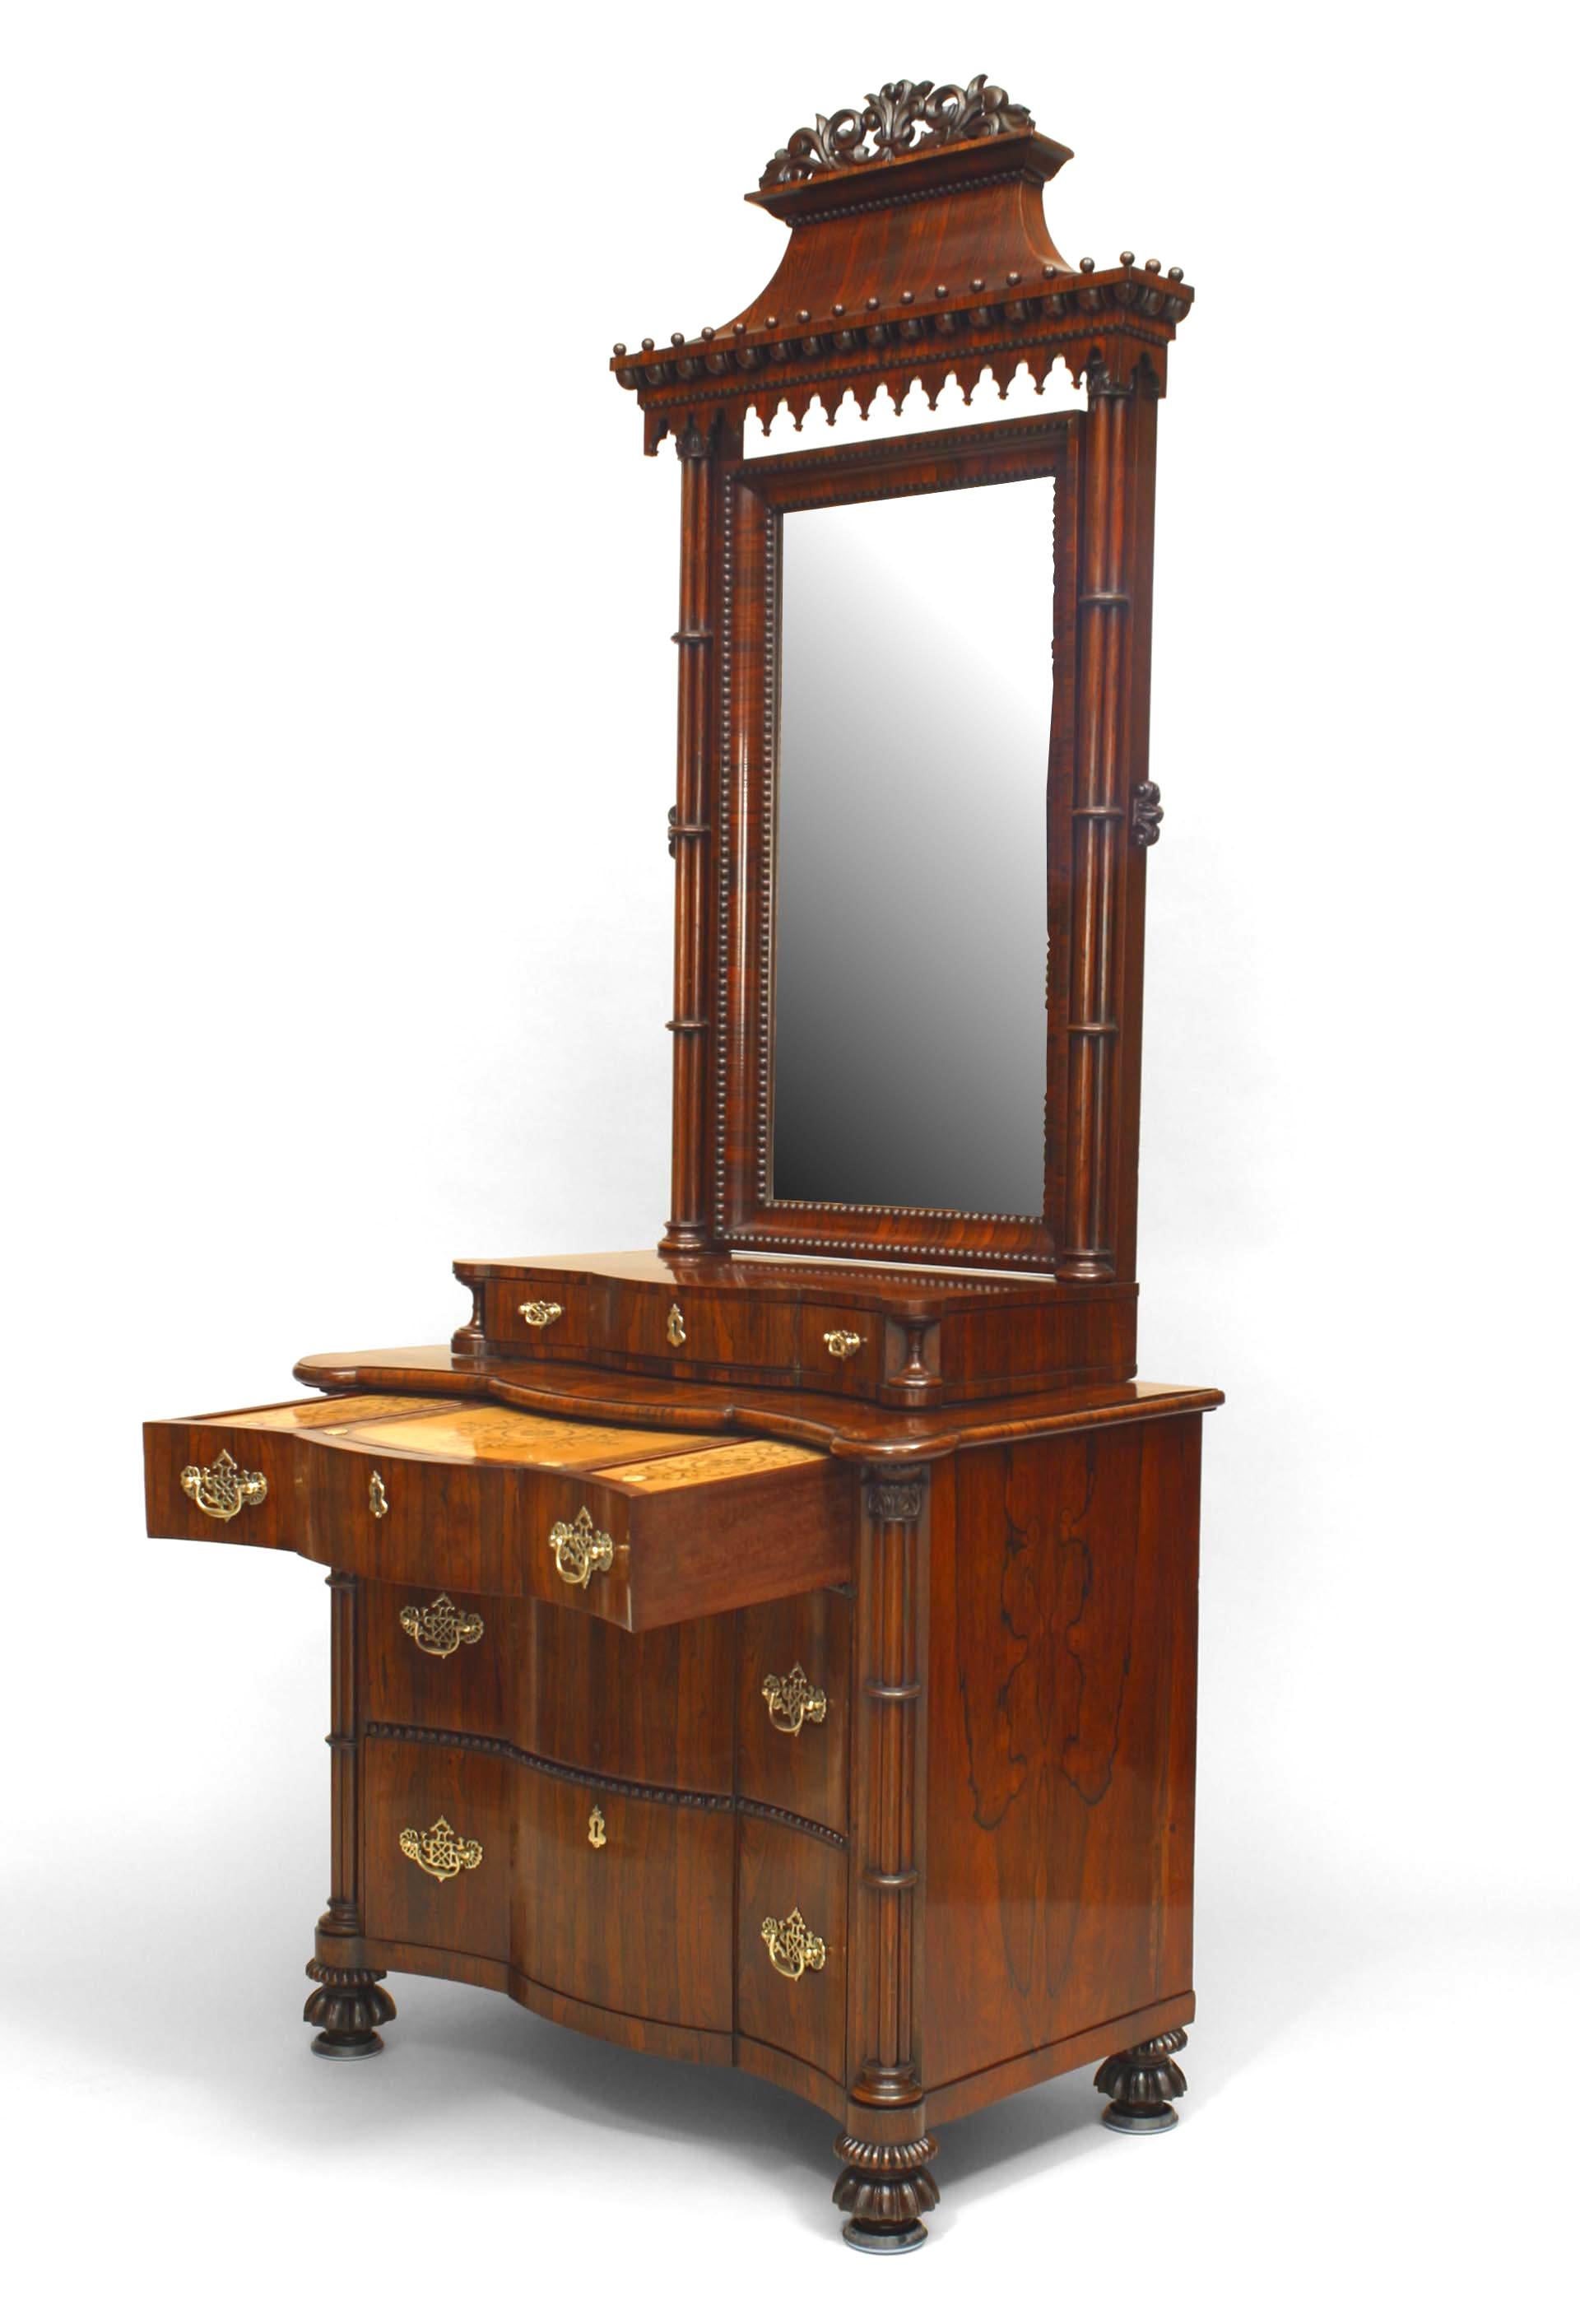 English Regency-style (Circa 1840) rosewood Gothic design chest of drawers with pagoda mirror top.
